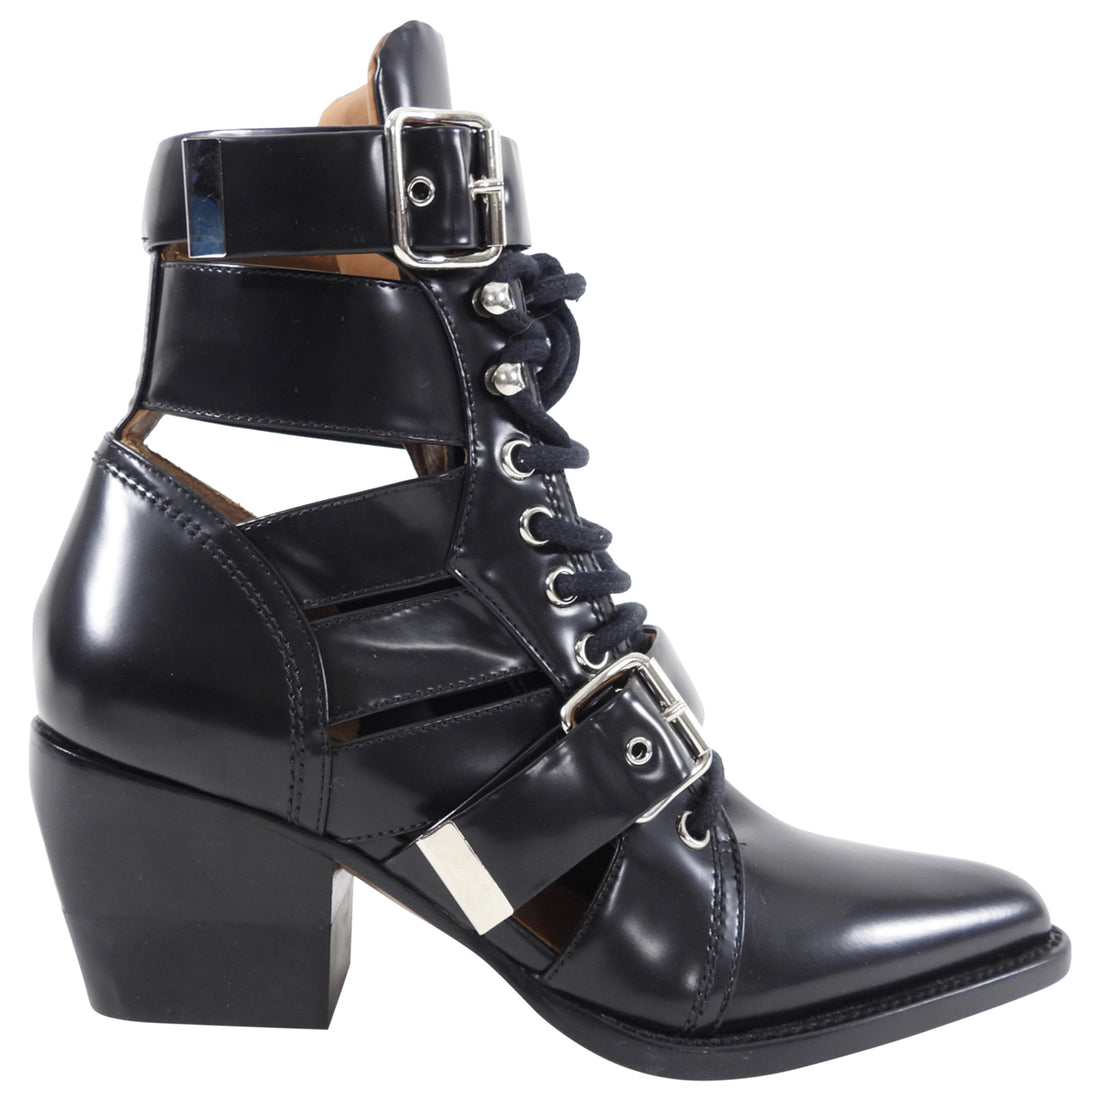 Chloe Black Glossed Leather Rylee Boots - 37